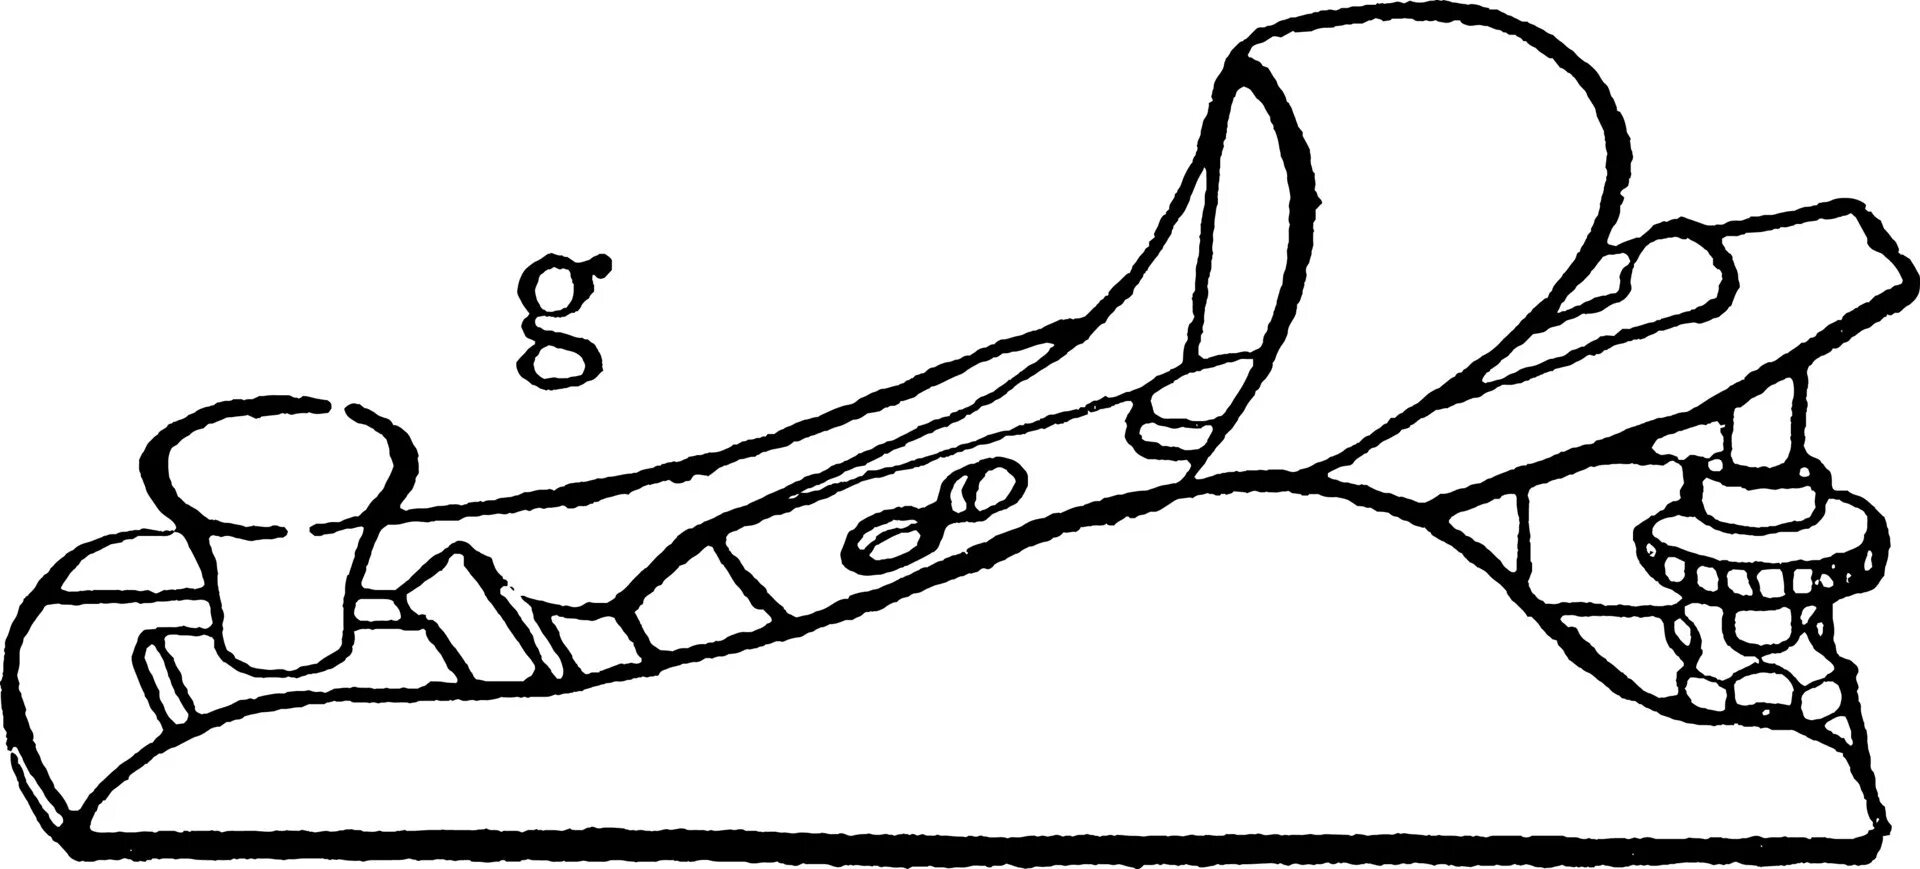 Glamor plane coloring page